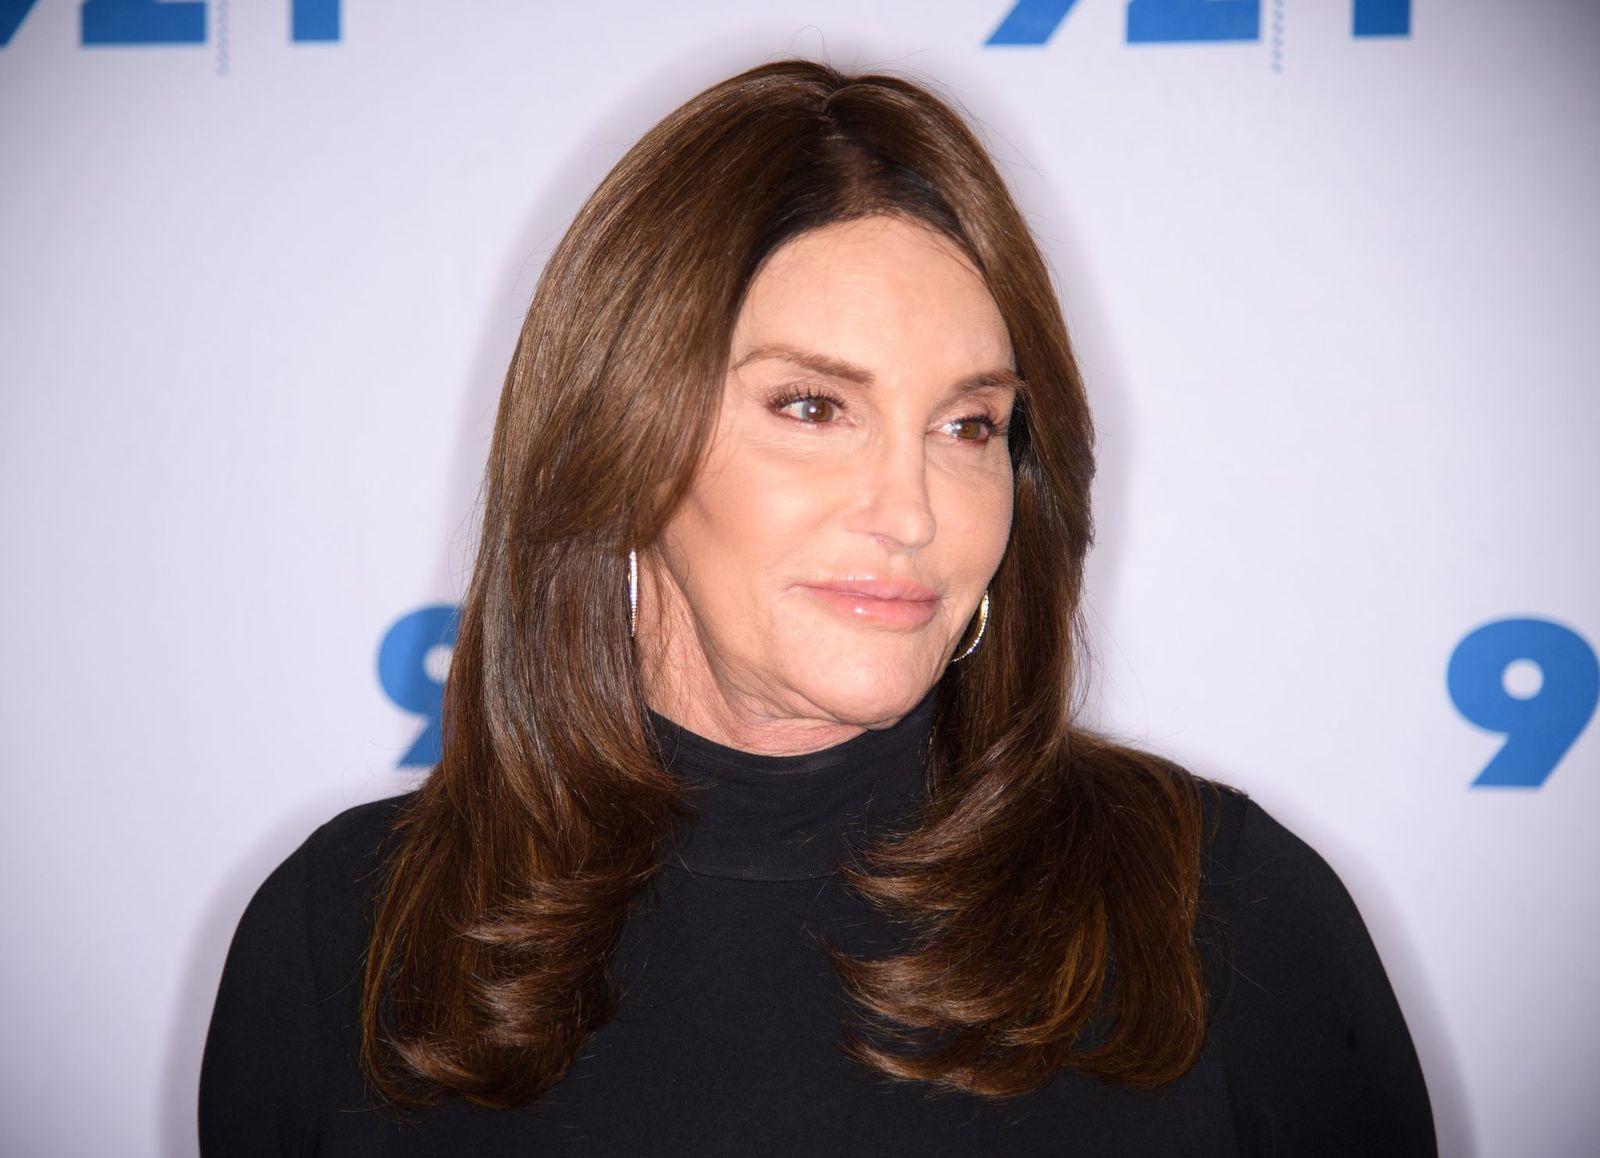 Caitlyn Jenner at the Transgender Identity and Courage event at the 92nd Street Y on April 25, 2017 | Photo: Getty Images